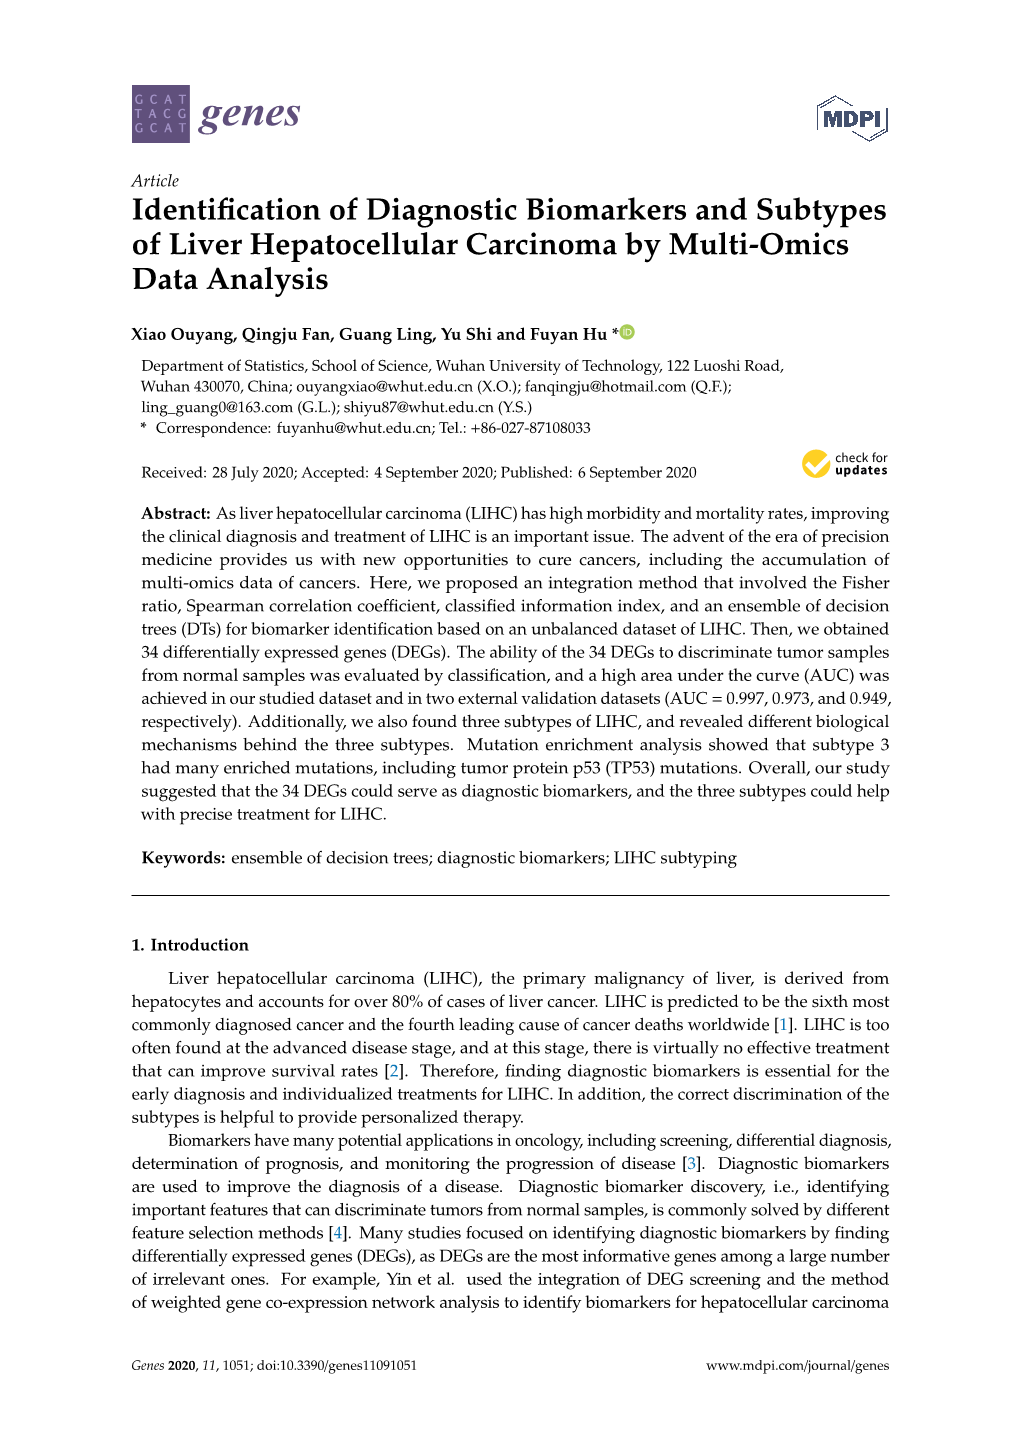 Identification of Diagnostic Biomarkers and Subtypes of Liver